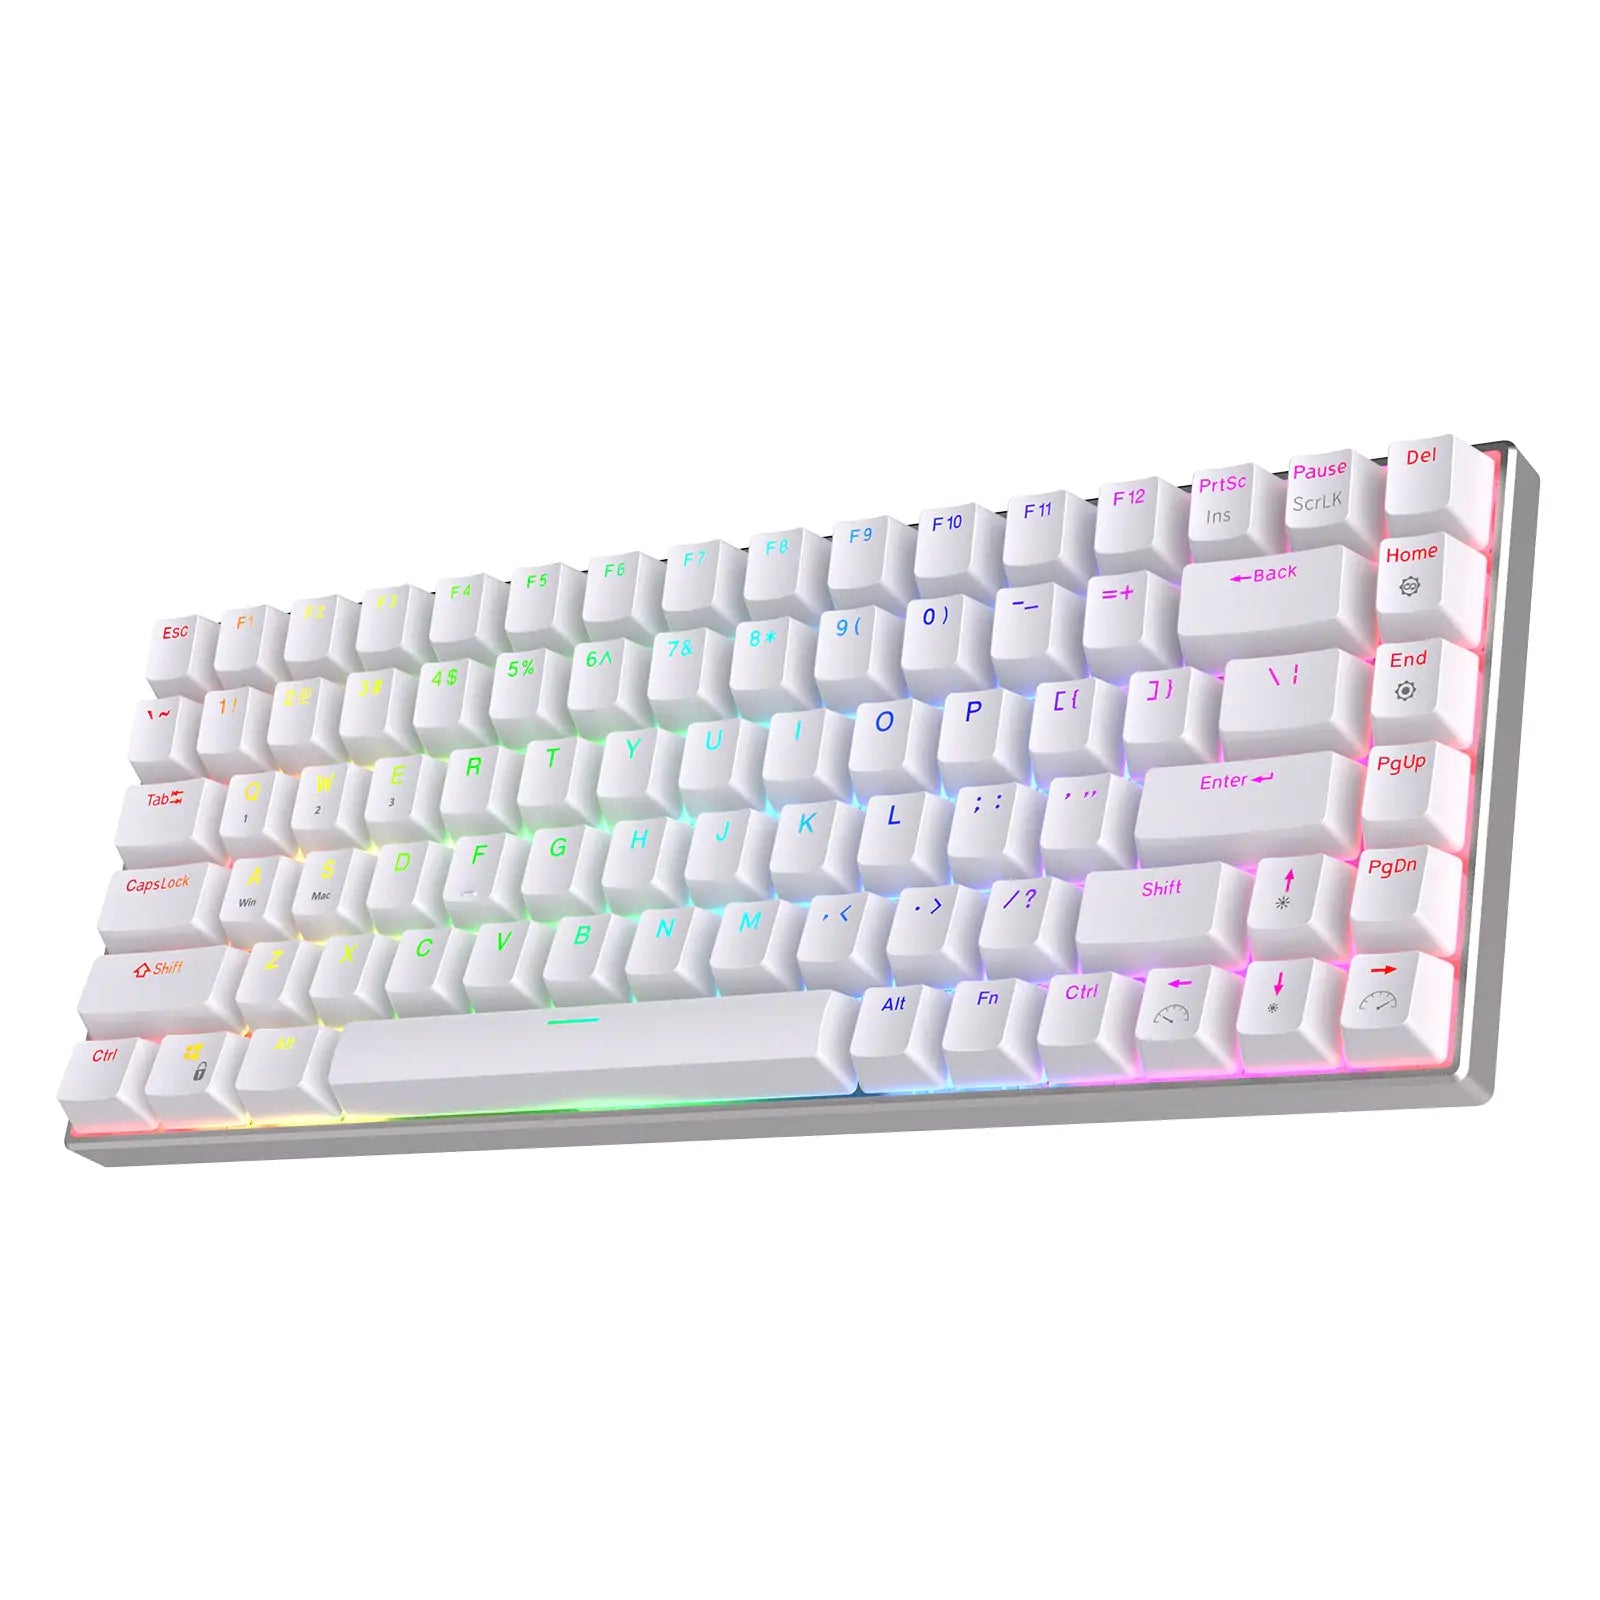 RK ROYAL KLUDGE RK84 Pro 75% RGB Triple Mode BT5.0/2.4G/Wired Hot-Swappable Mechanical Keyboard with Aluminum Frame, Clicky Blue Switch